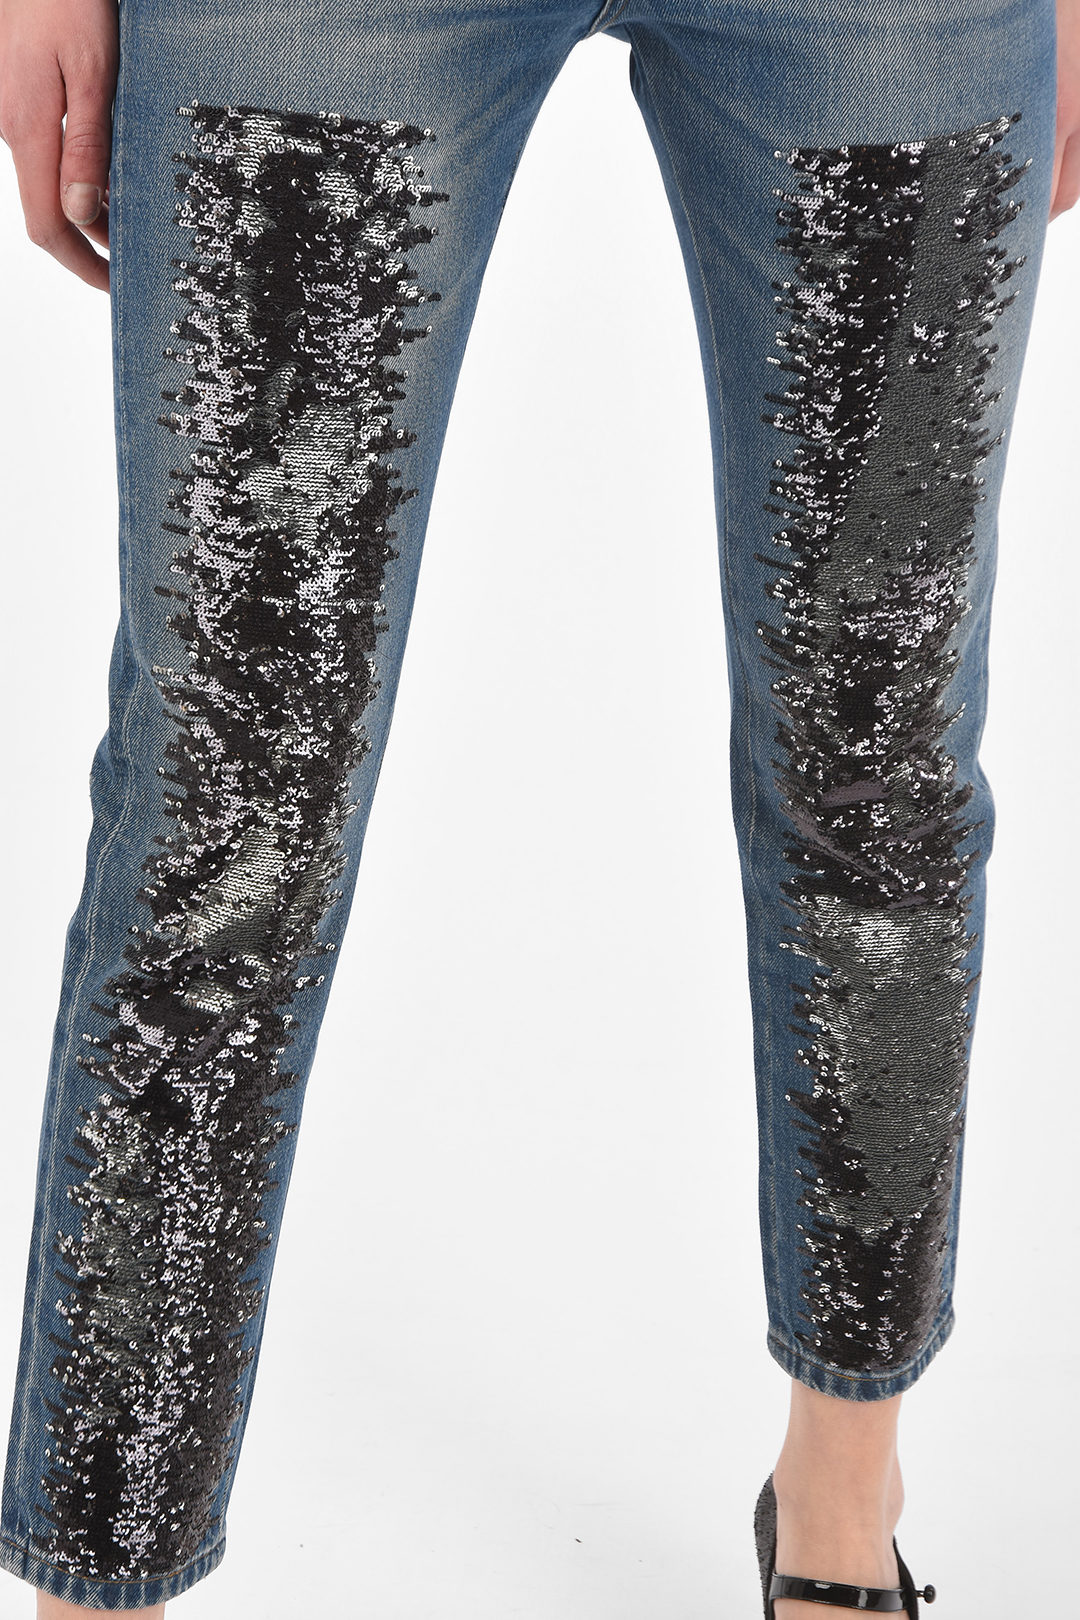 Philipp Plein Couture black leather effect jeggings size XS